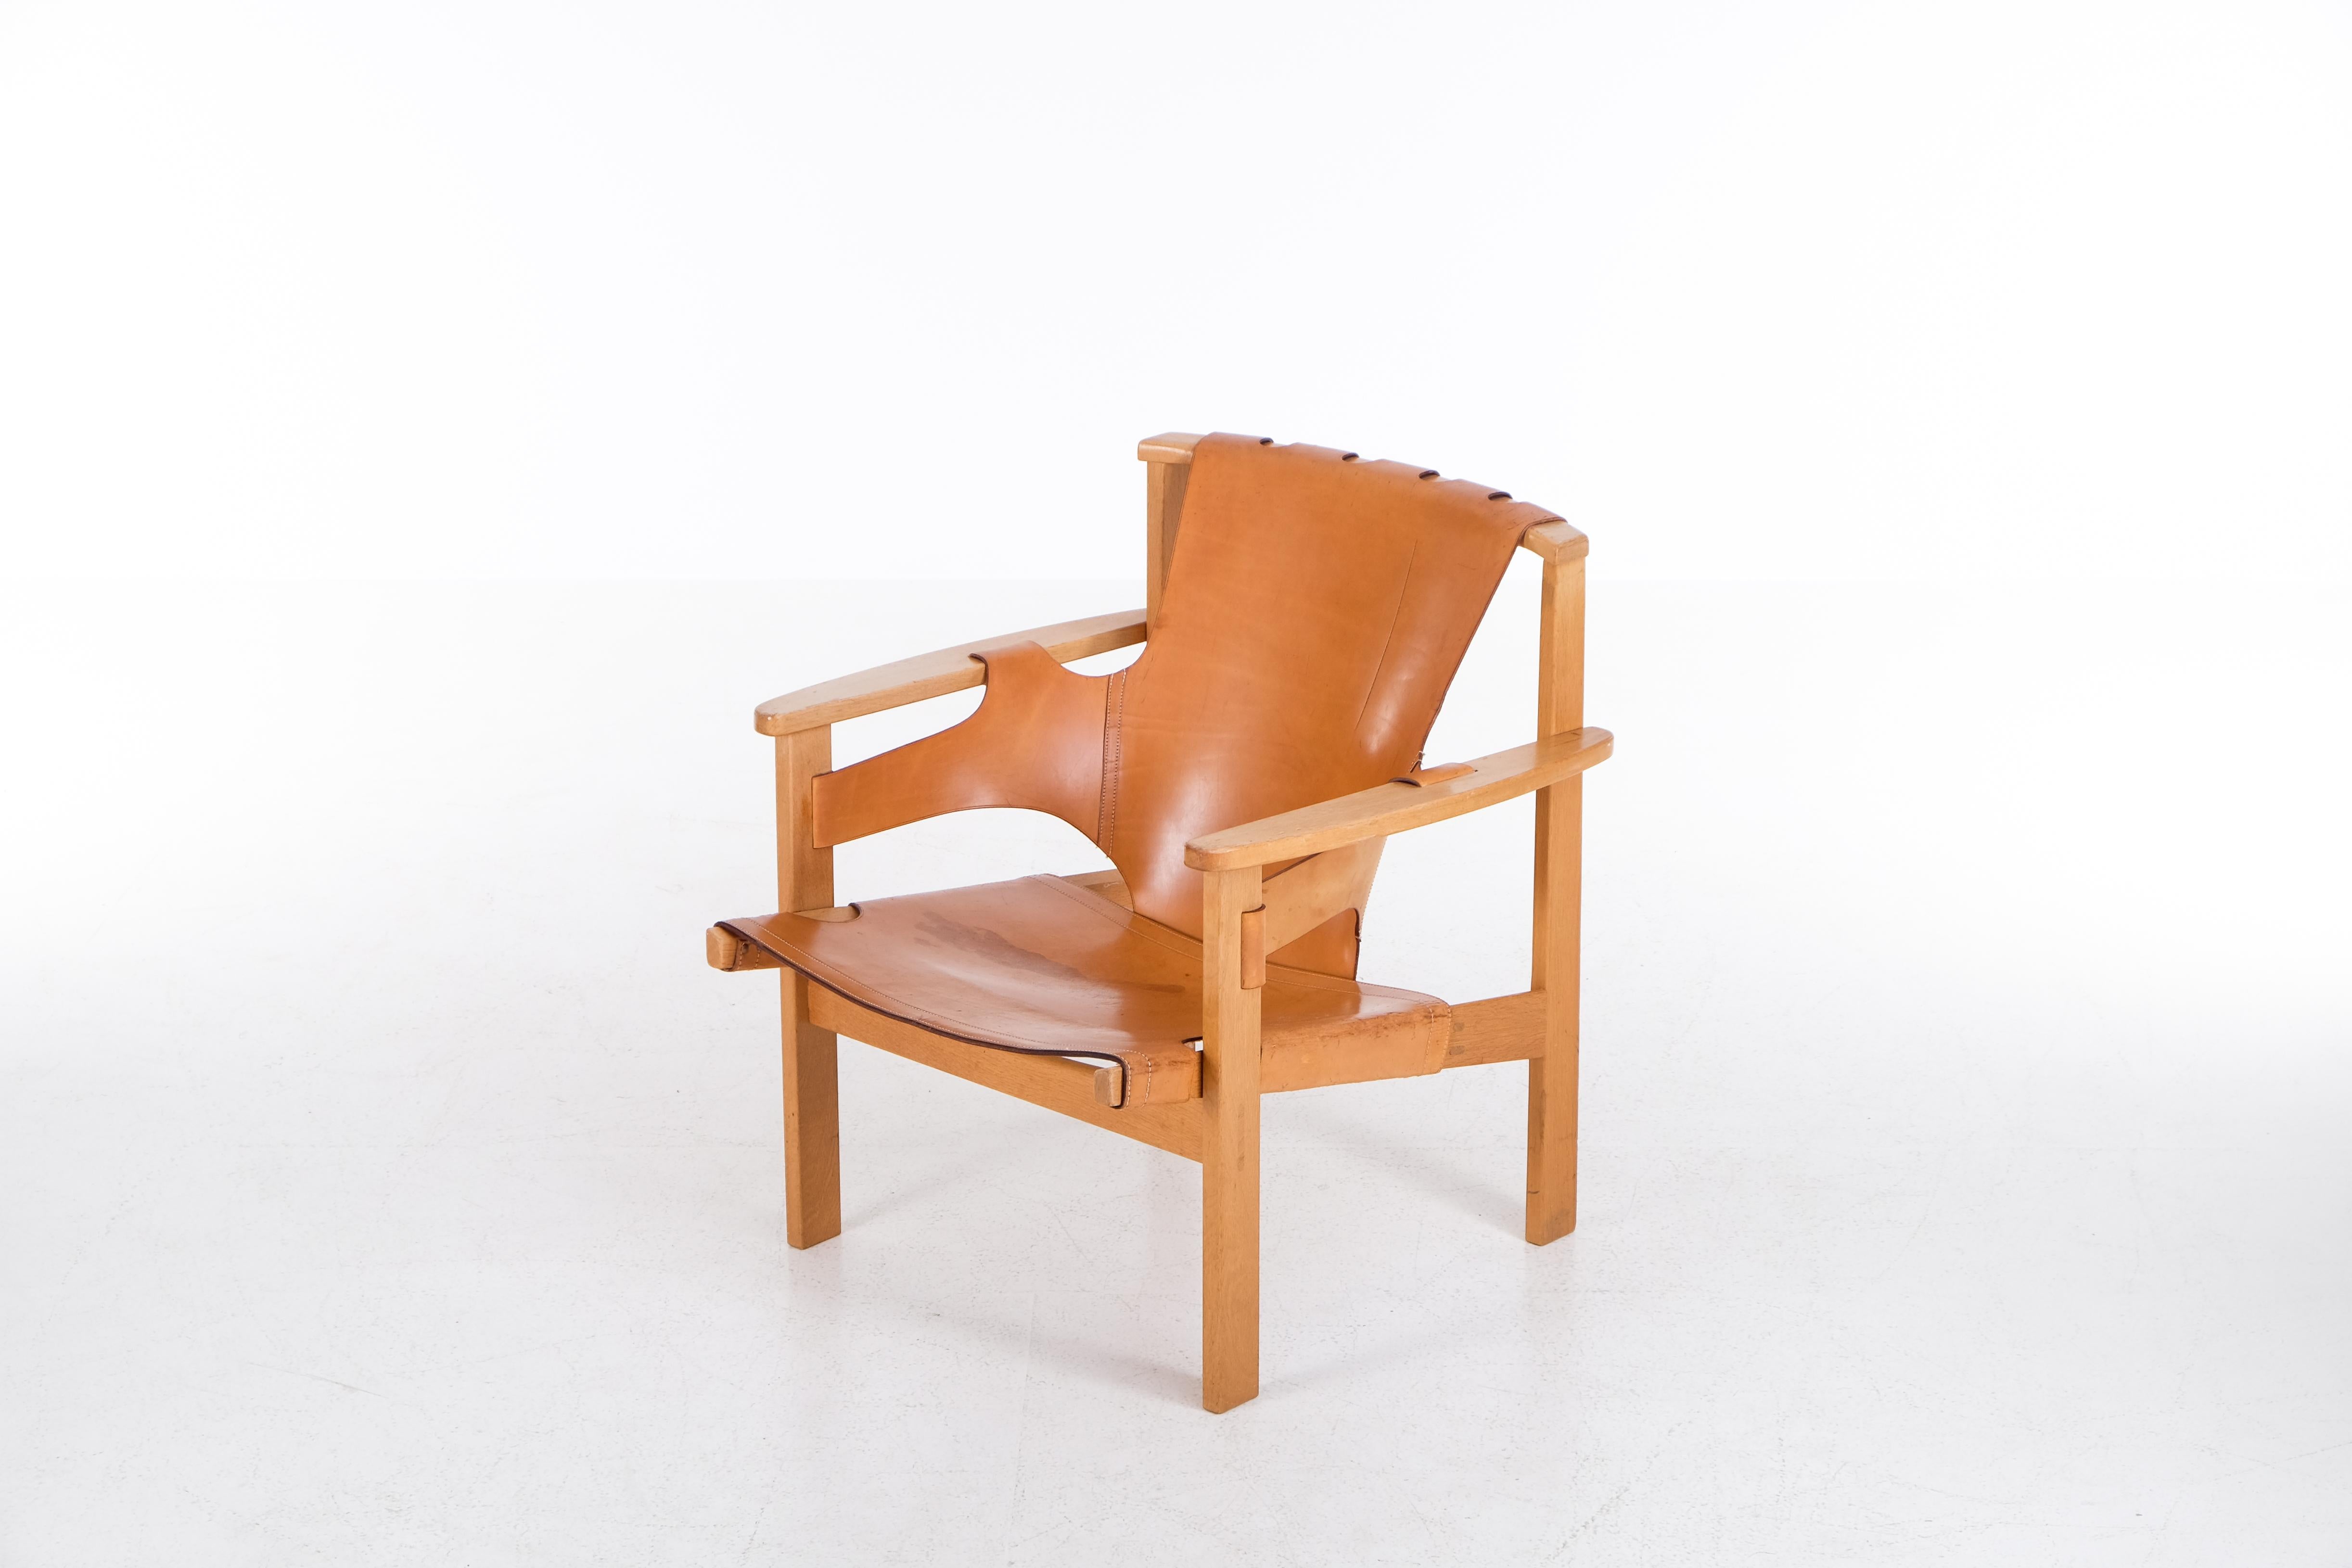 Natural patinated leather and oak. Designed in 1957. Shown at the Triennale in Milan in 1957, since then referred to as the 